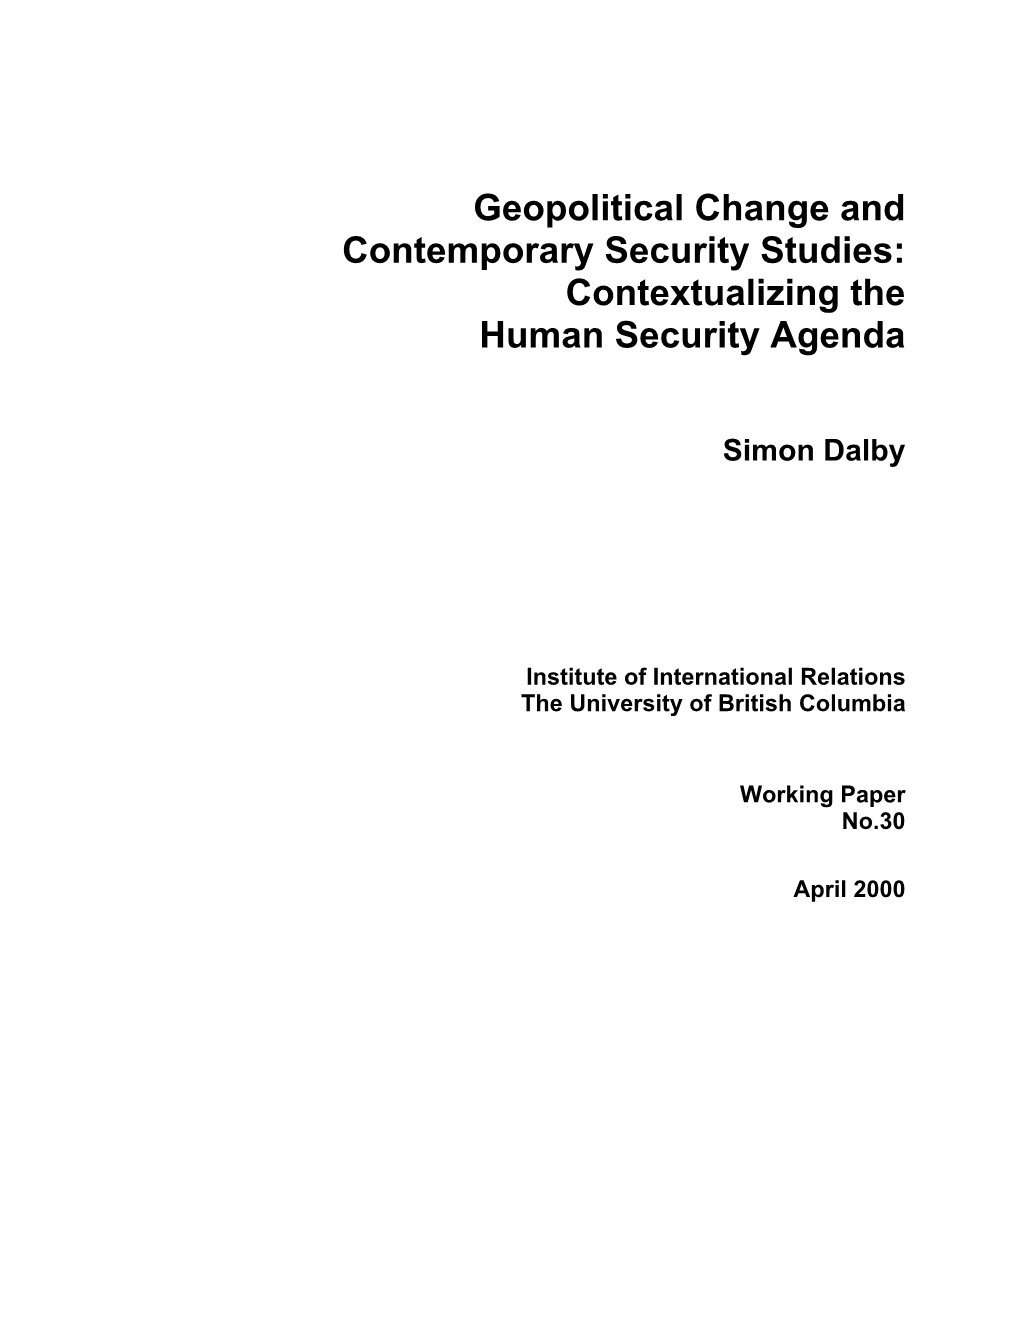 Geopolitical Change and Contemporary Security Studies: Contextualizing the Human Security Agenda